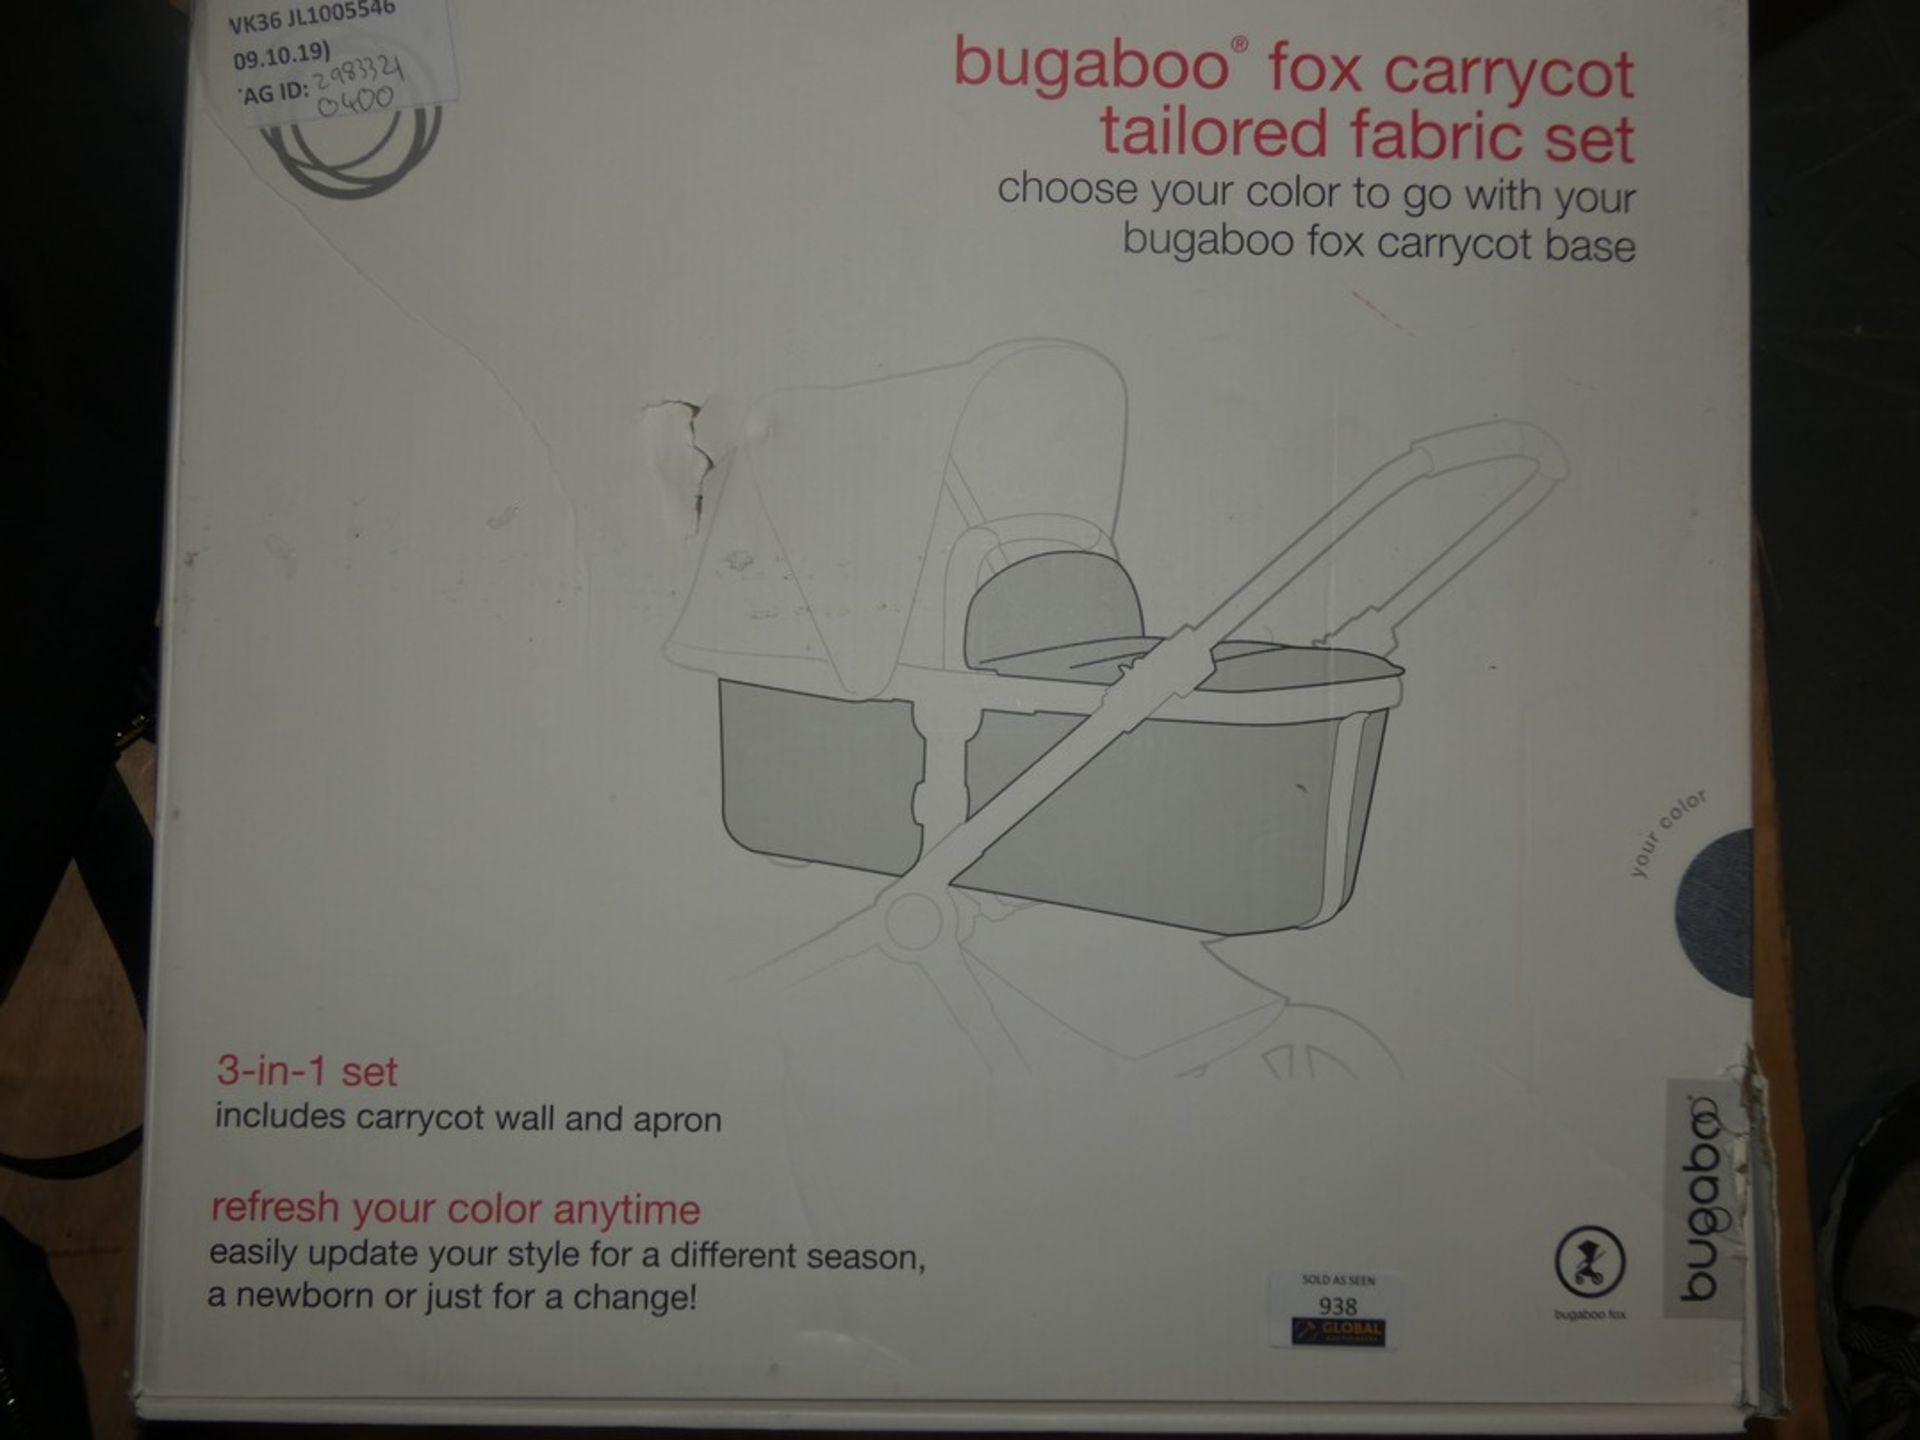 Boxed Bugaboo Boxed Fox Tailored 3 in 1 Fabric Carry Cot Set RRP £40 (2983321) (Public Viewing and